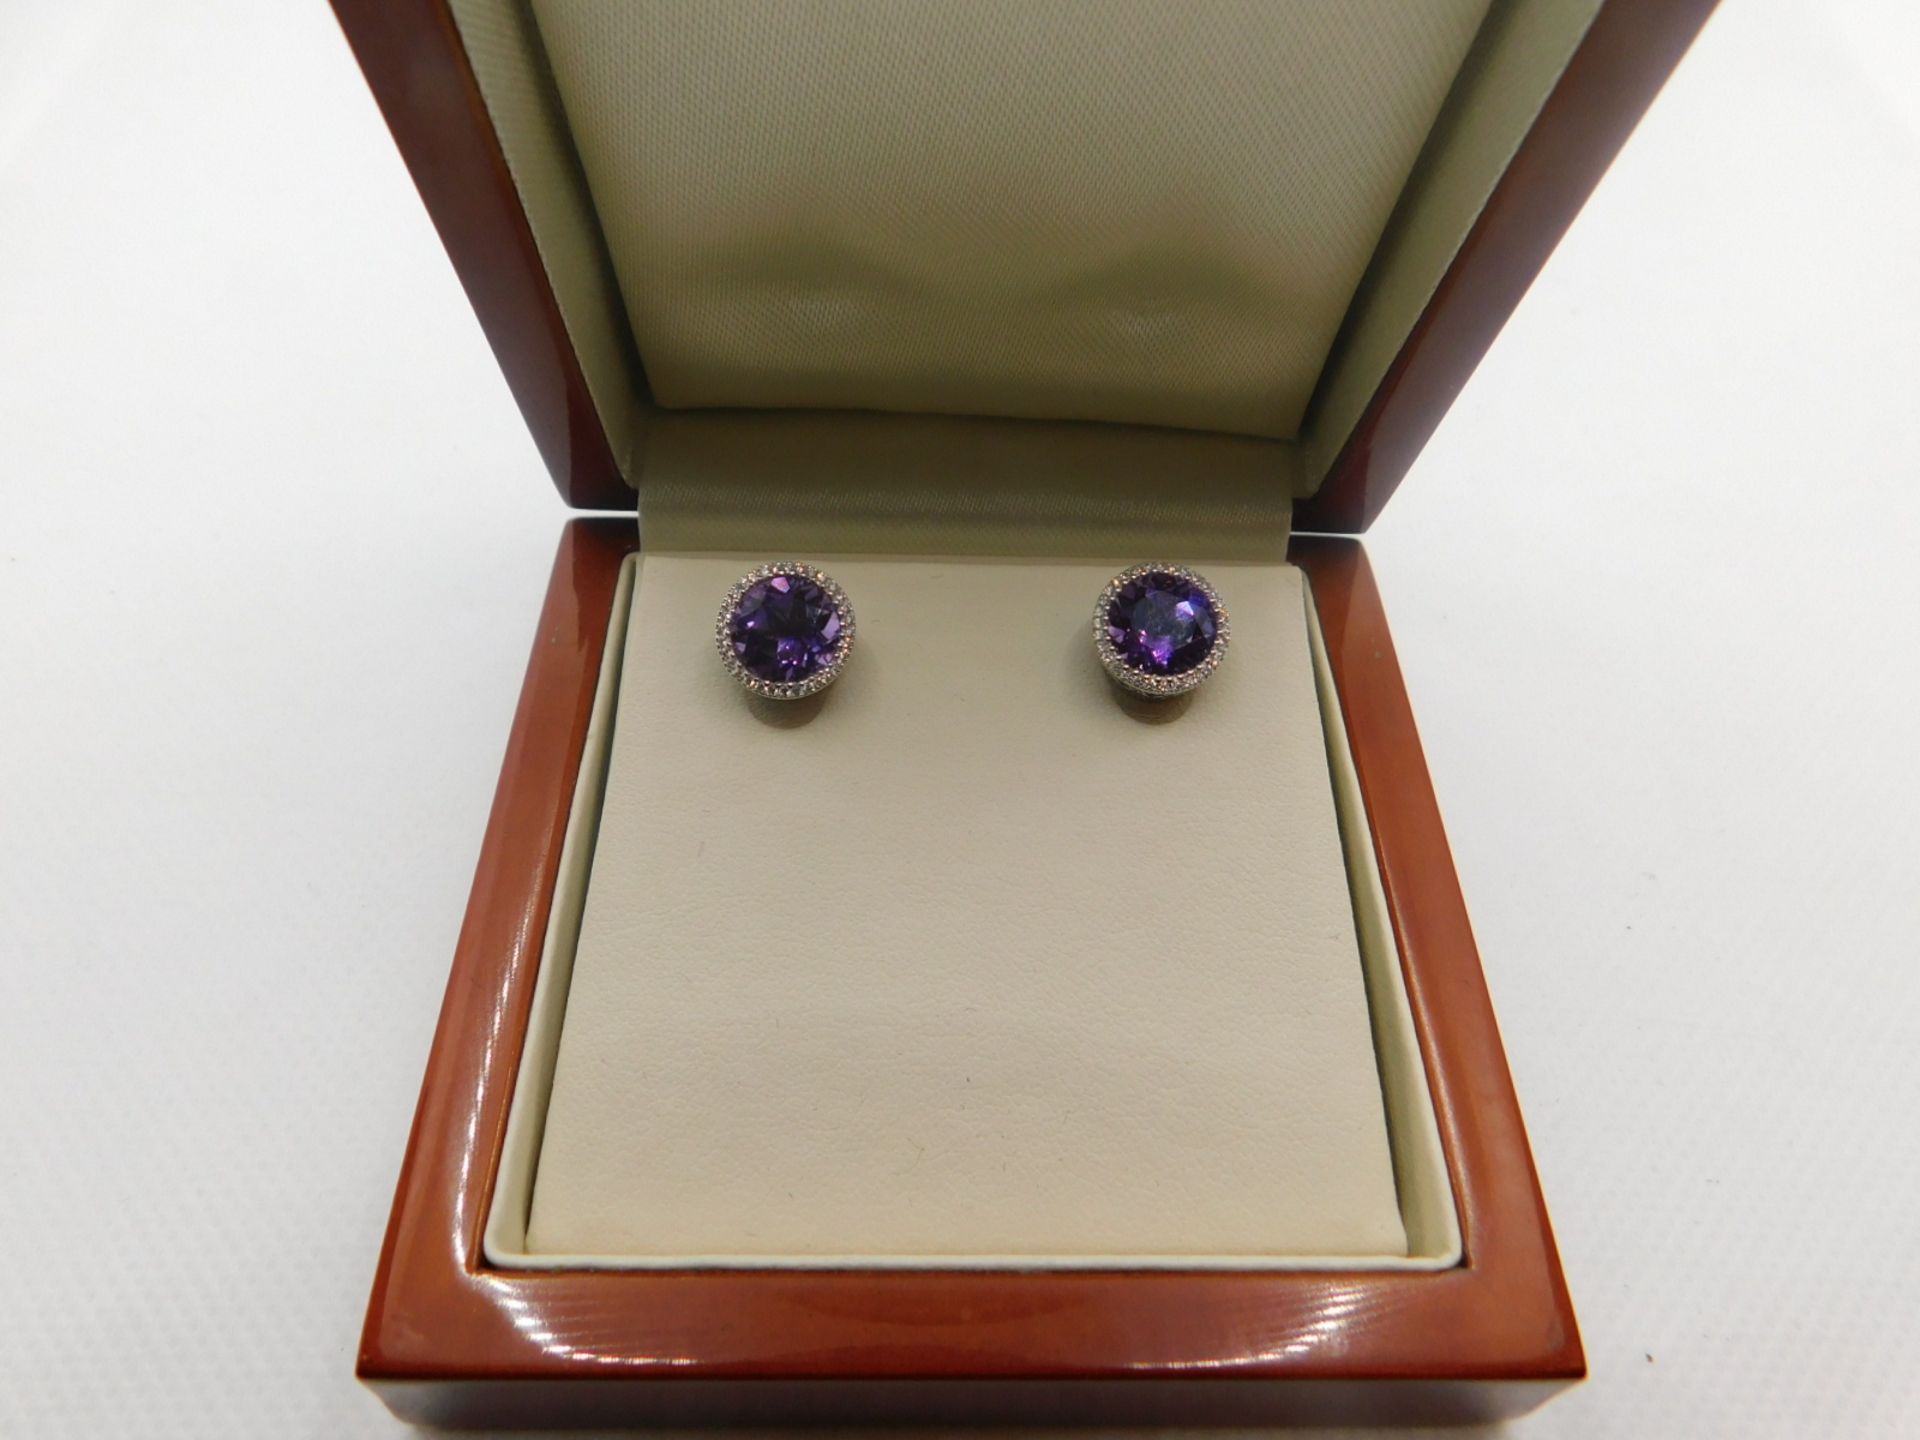 1 BOXED ROUND CUT PURPLE AMETHYST AND 0.18CTW DIAMOND EARRINGS RRP Â£499 (ONE HOLDING MISSING)